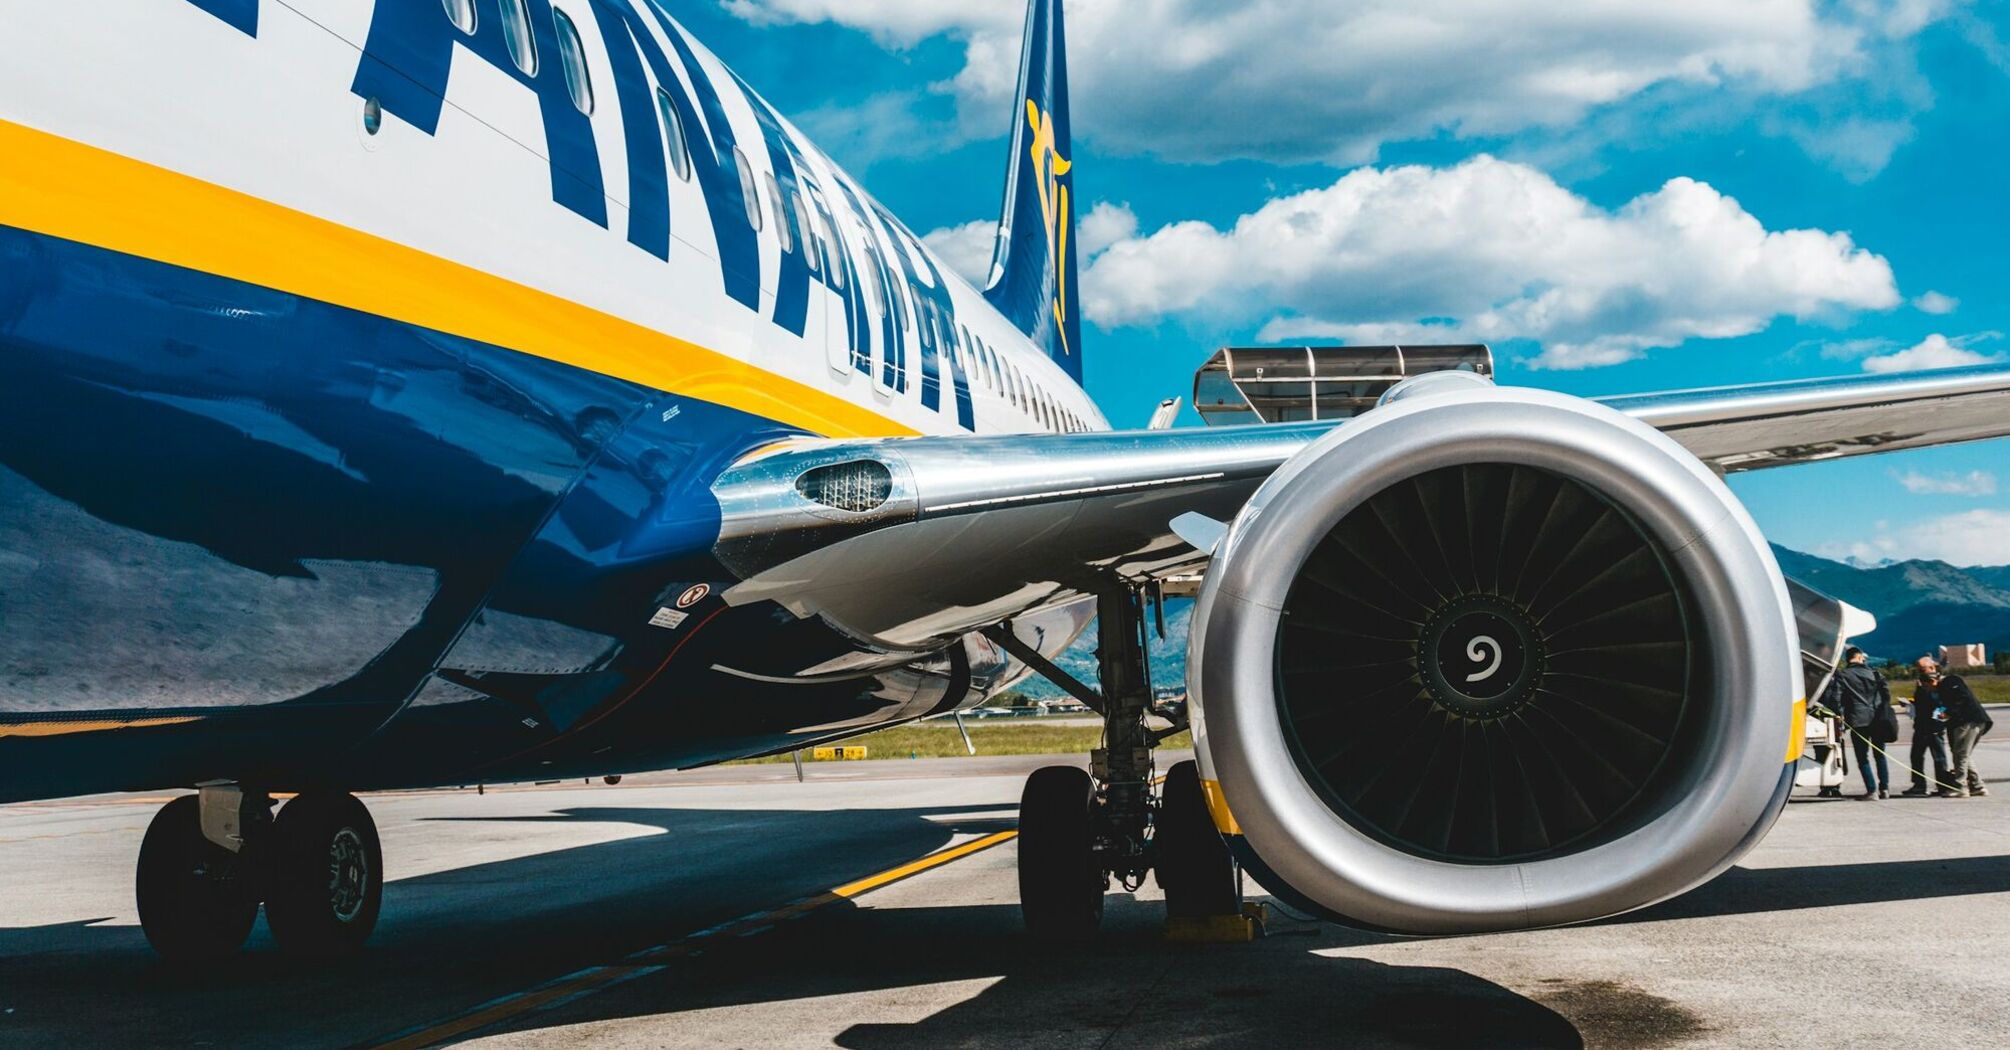 A Ryanair airplane parked on the tarmac under a blue sky